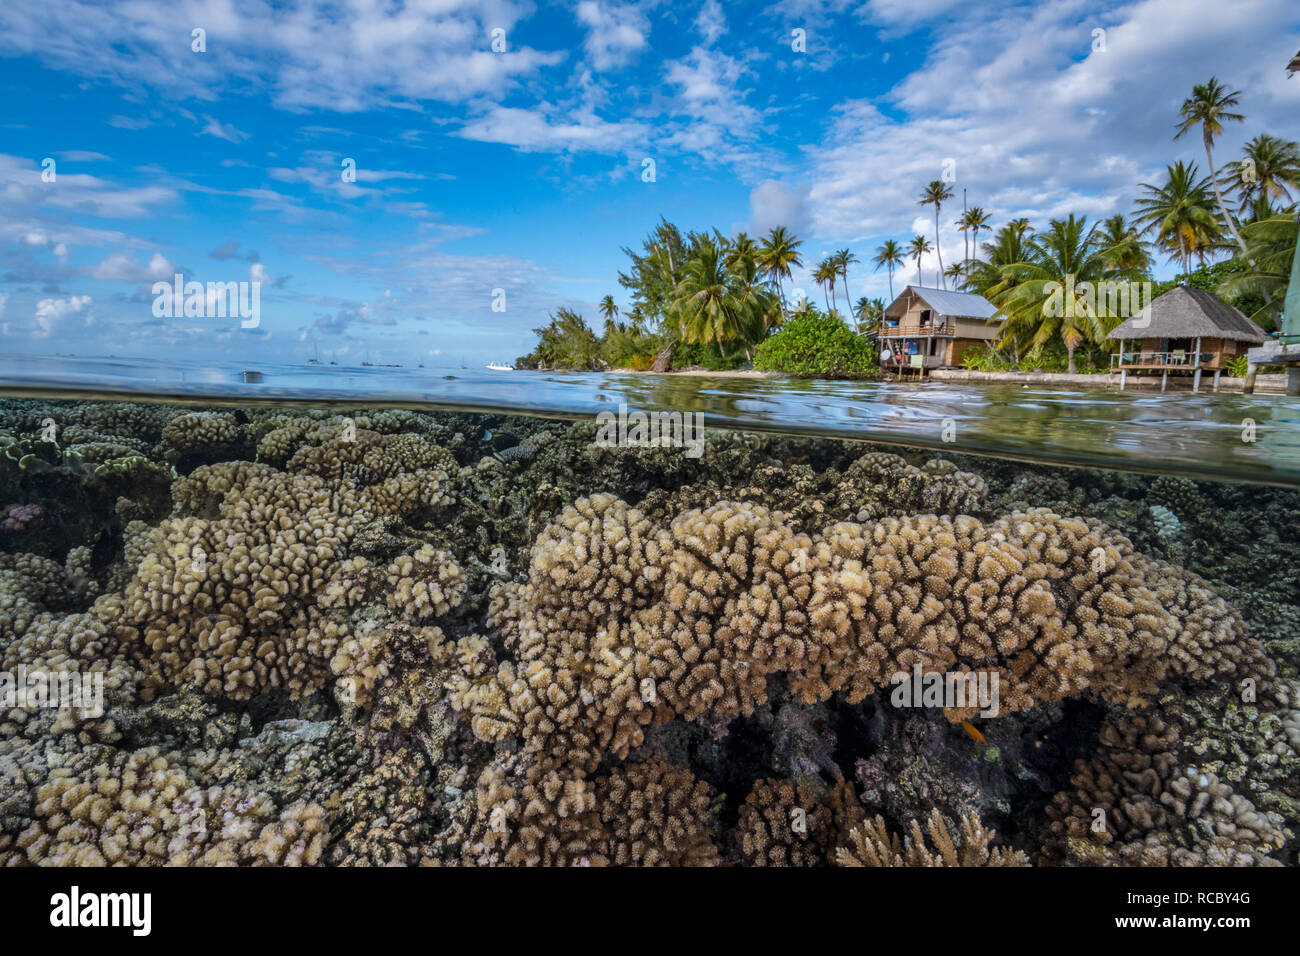 Hard Coral Reef with tropical island with palm trees and huts in the background Stock Photo